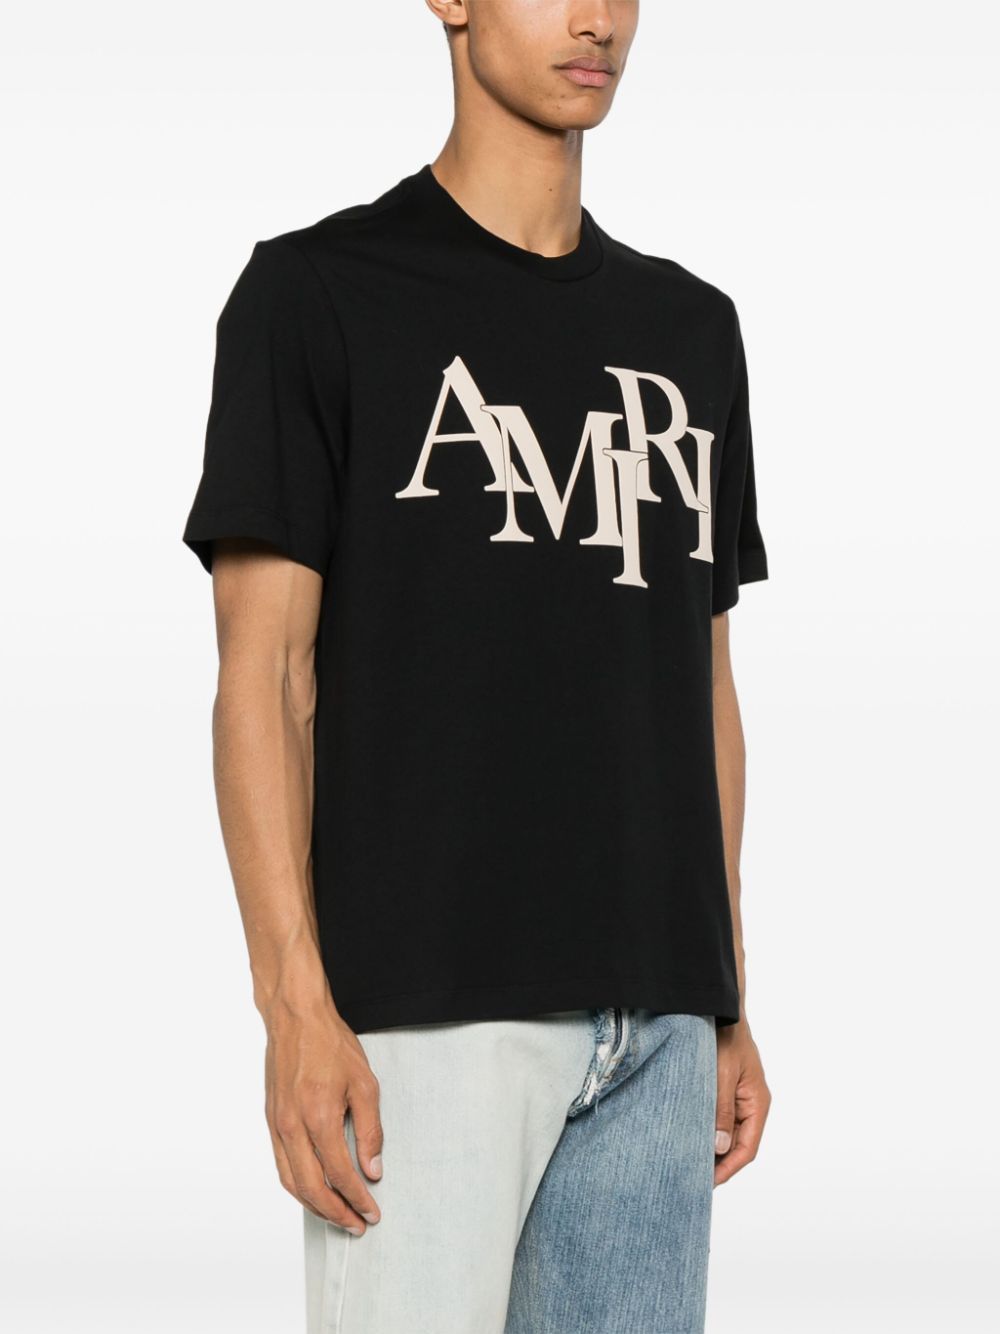 AMIRI Staggered Black Tee for Men - Limited Edition